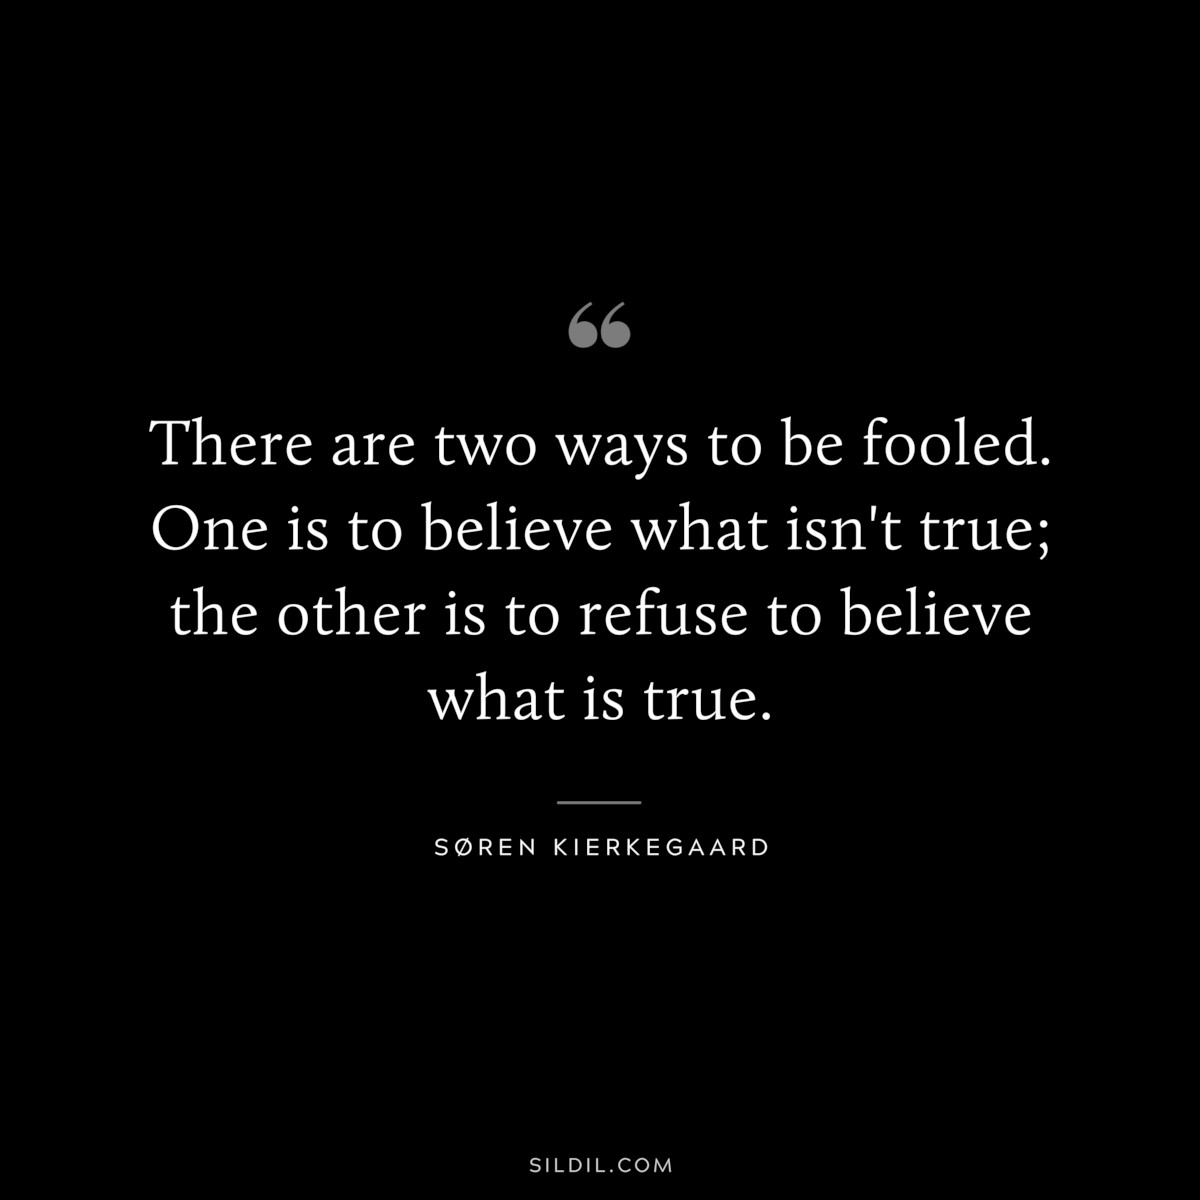 There are two ways to be fooled. One is to believe what isn't true; the other is to refuse to believe what is true. ― Søren Kierkegaard